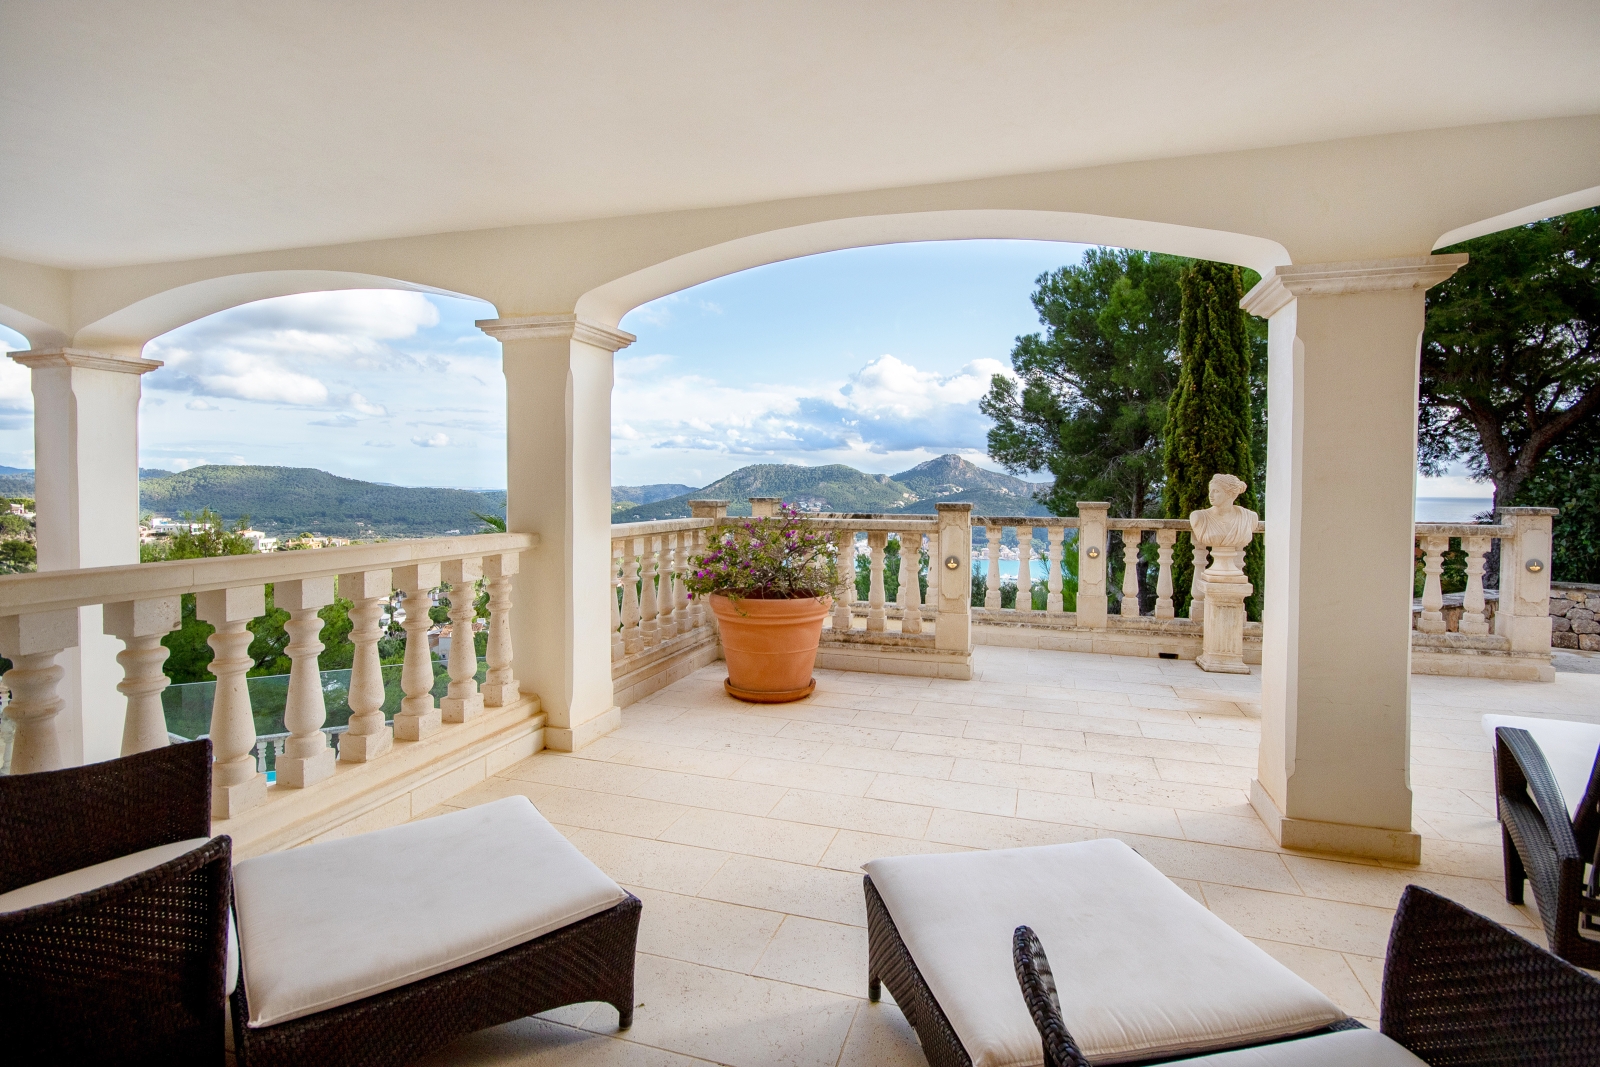 Balcony with sun loungers, stone archways, statue, flowers & harbour & mountain view at Casa Verano in Mallorca, Spain